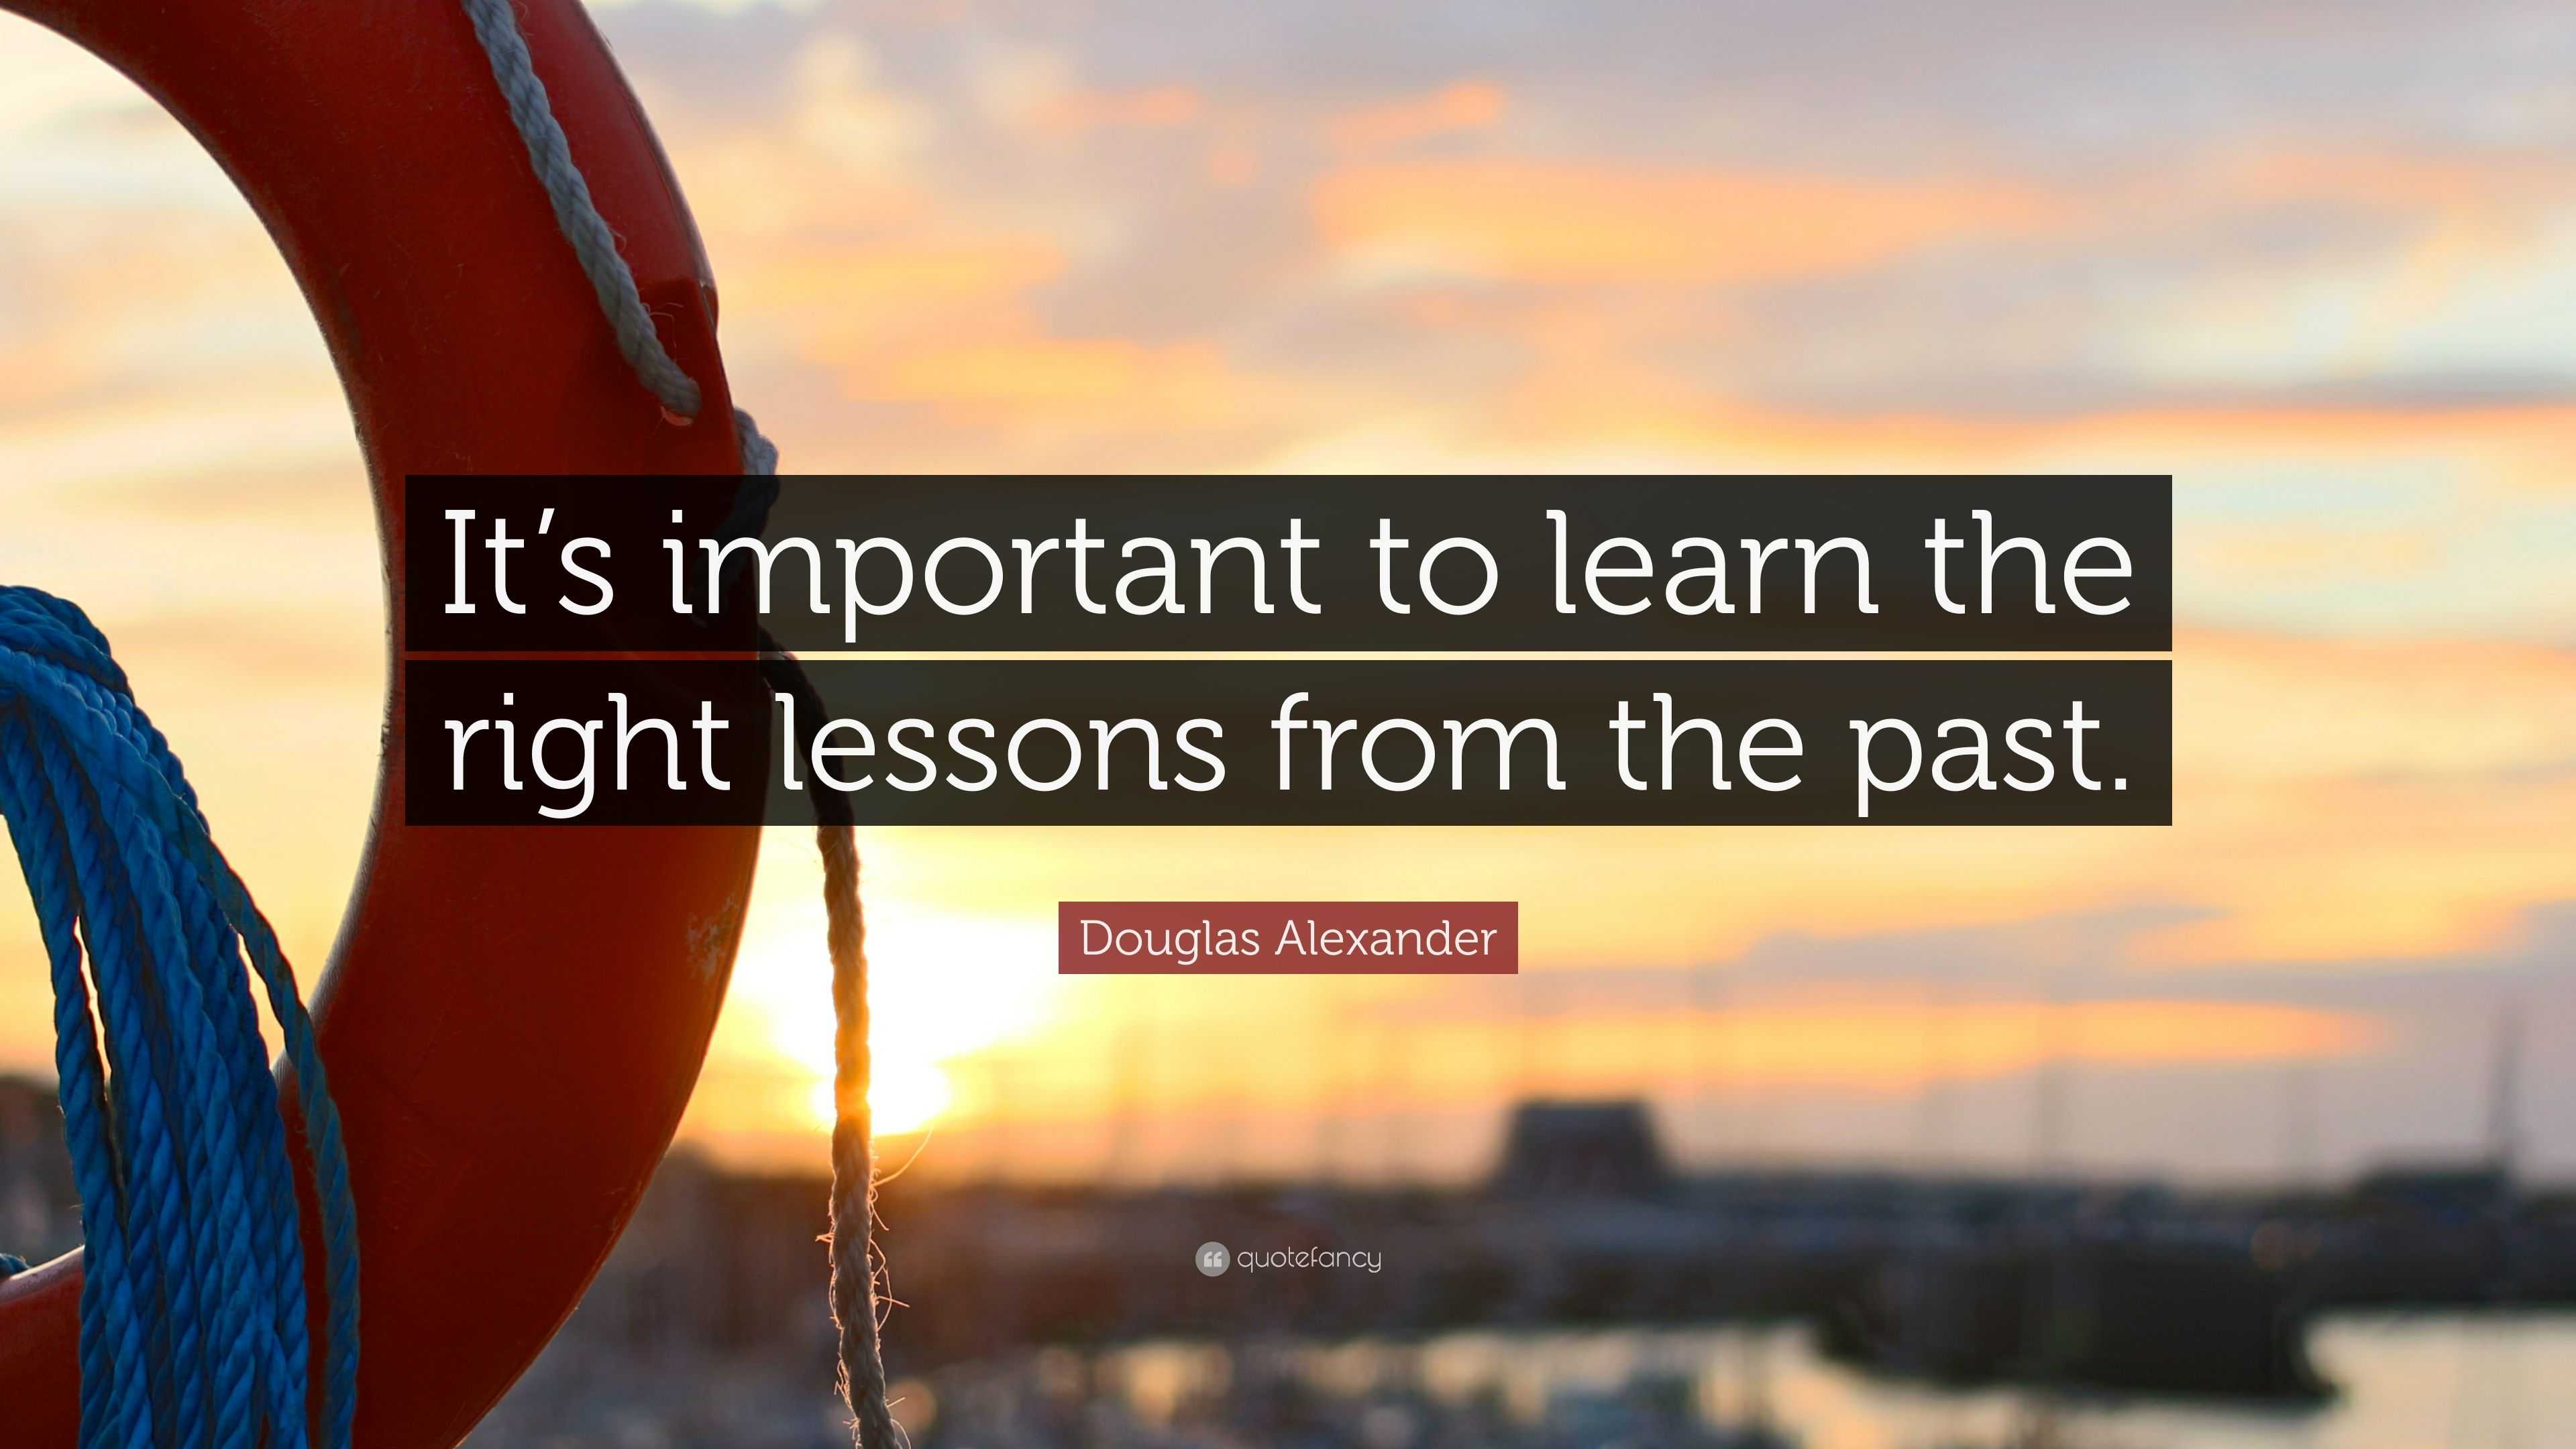 Douglas Alexander Quote: “It's important to learn the right